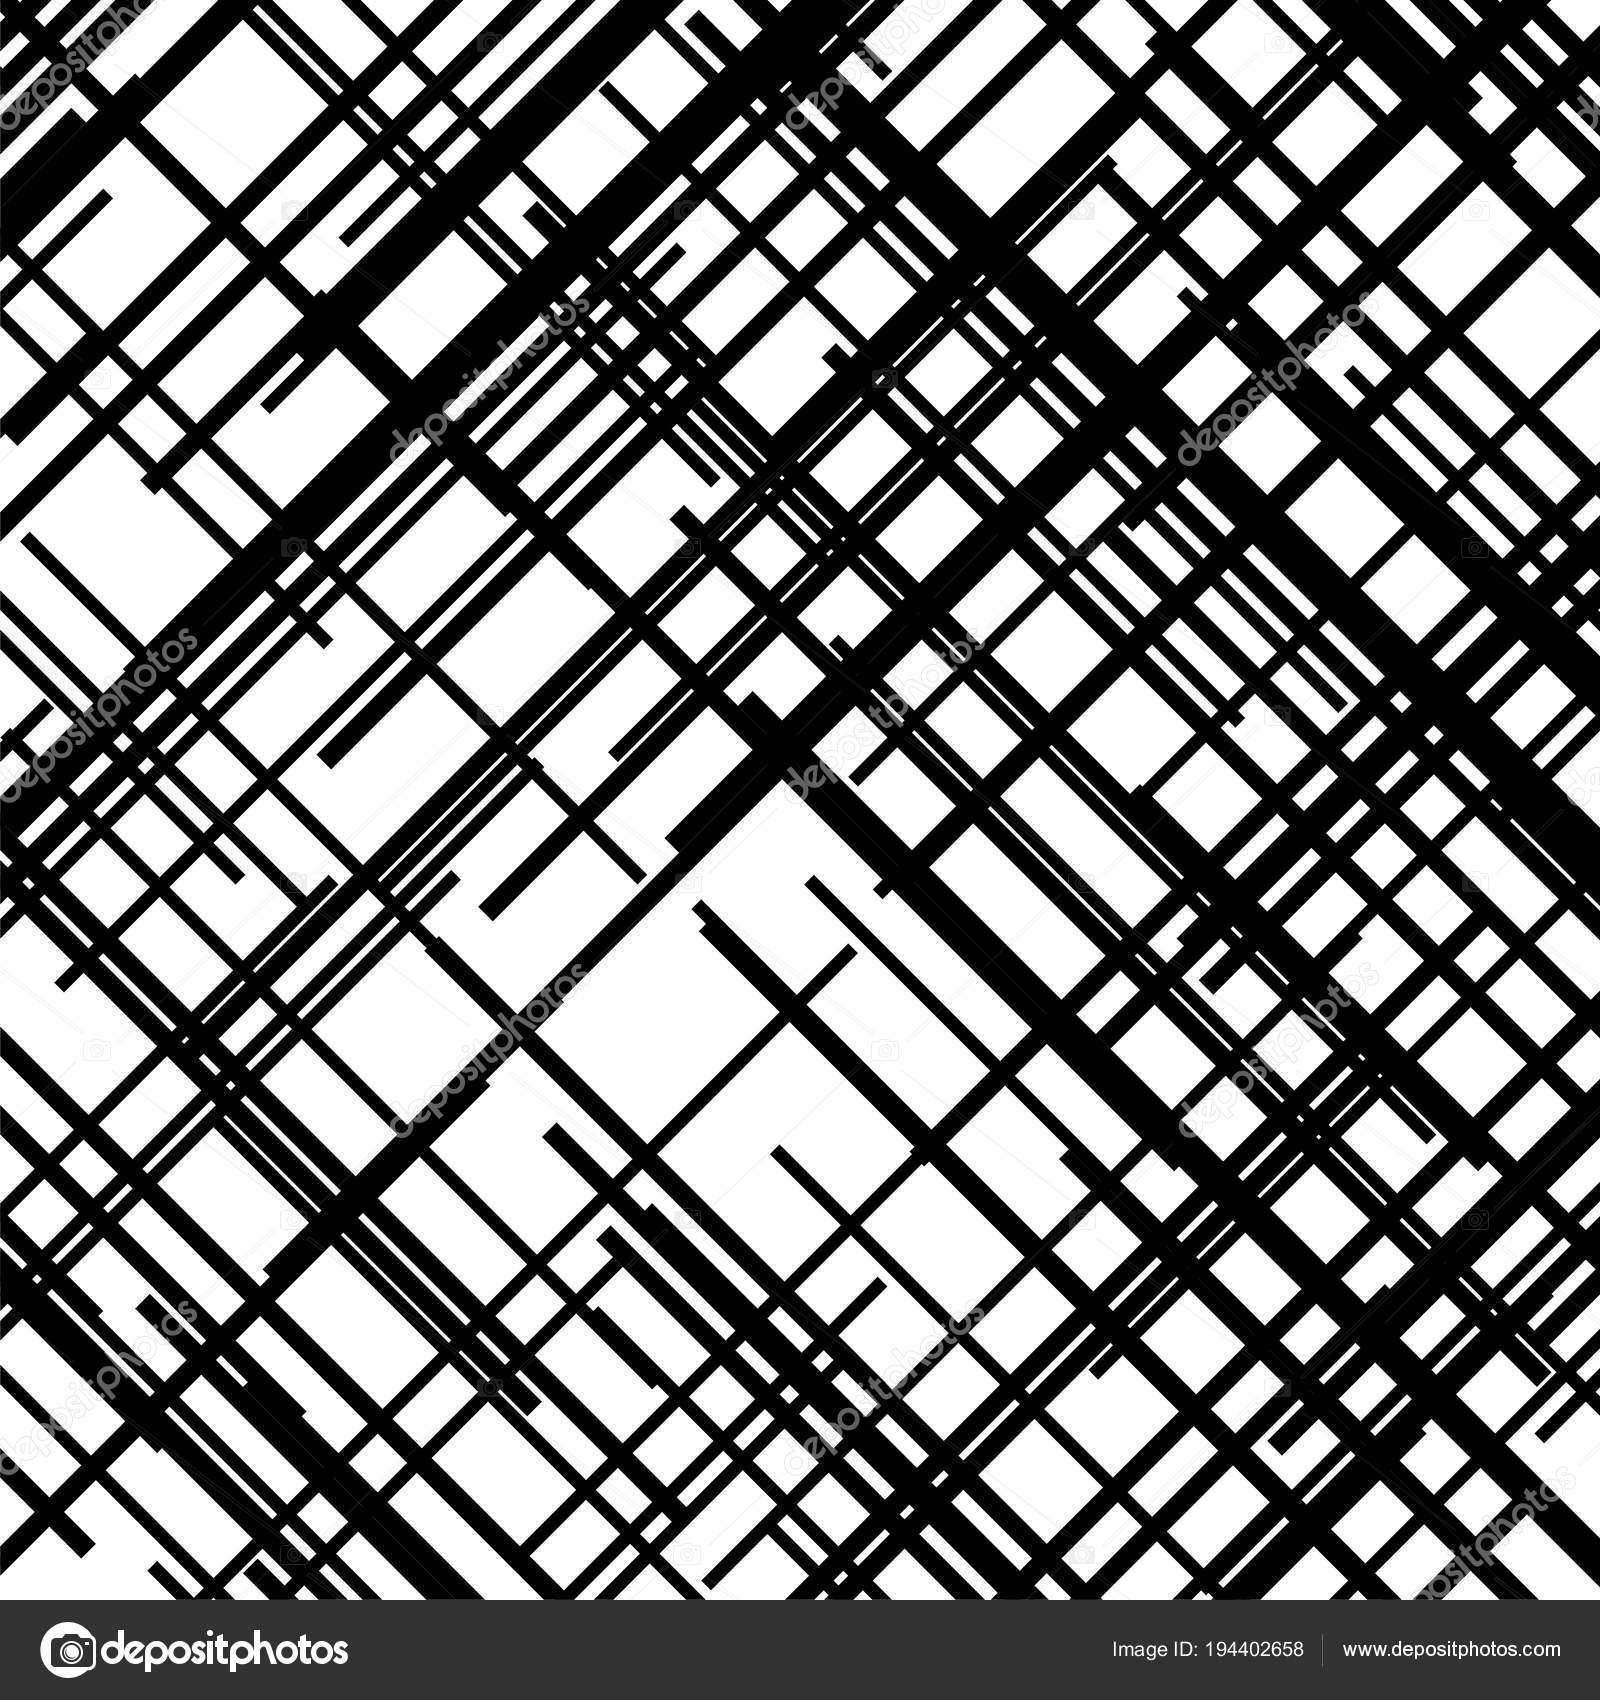 Criss cross pattern. Texture with intersecting straight lines. Digital ...